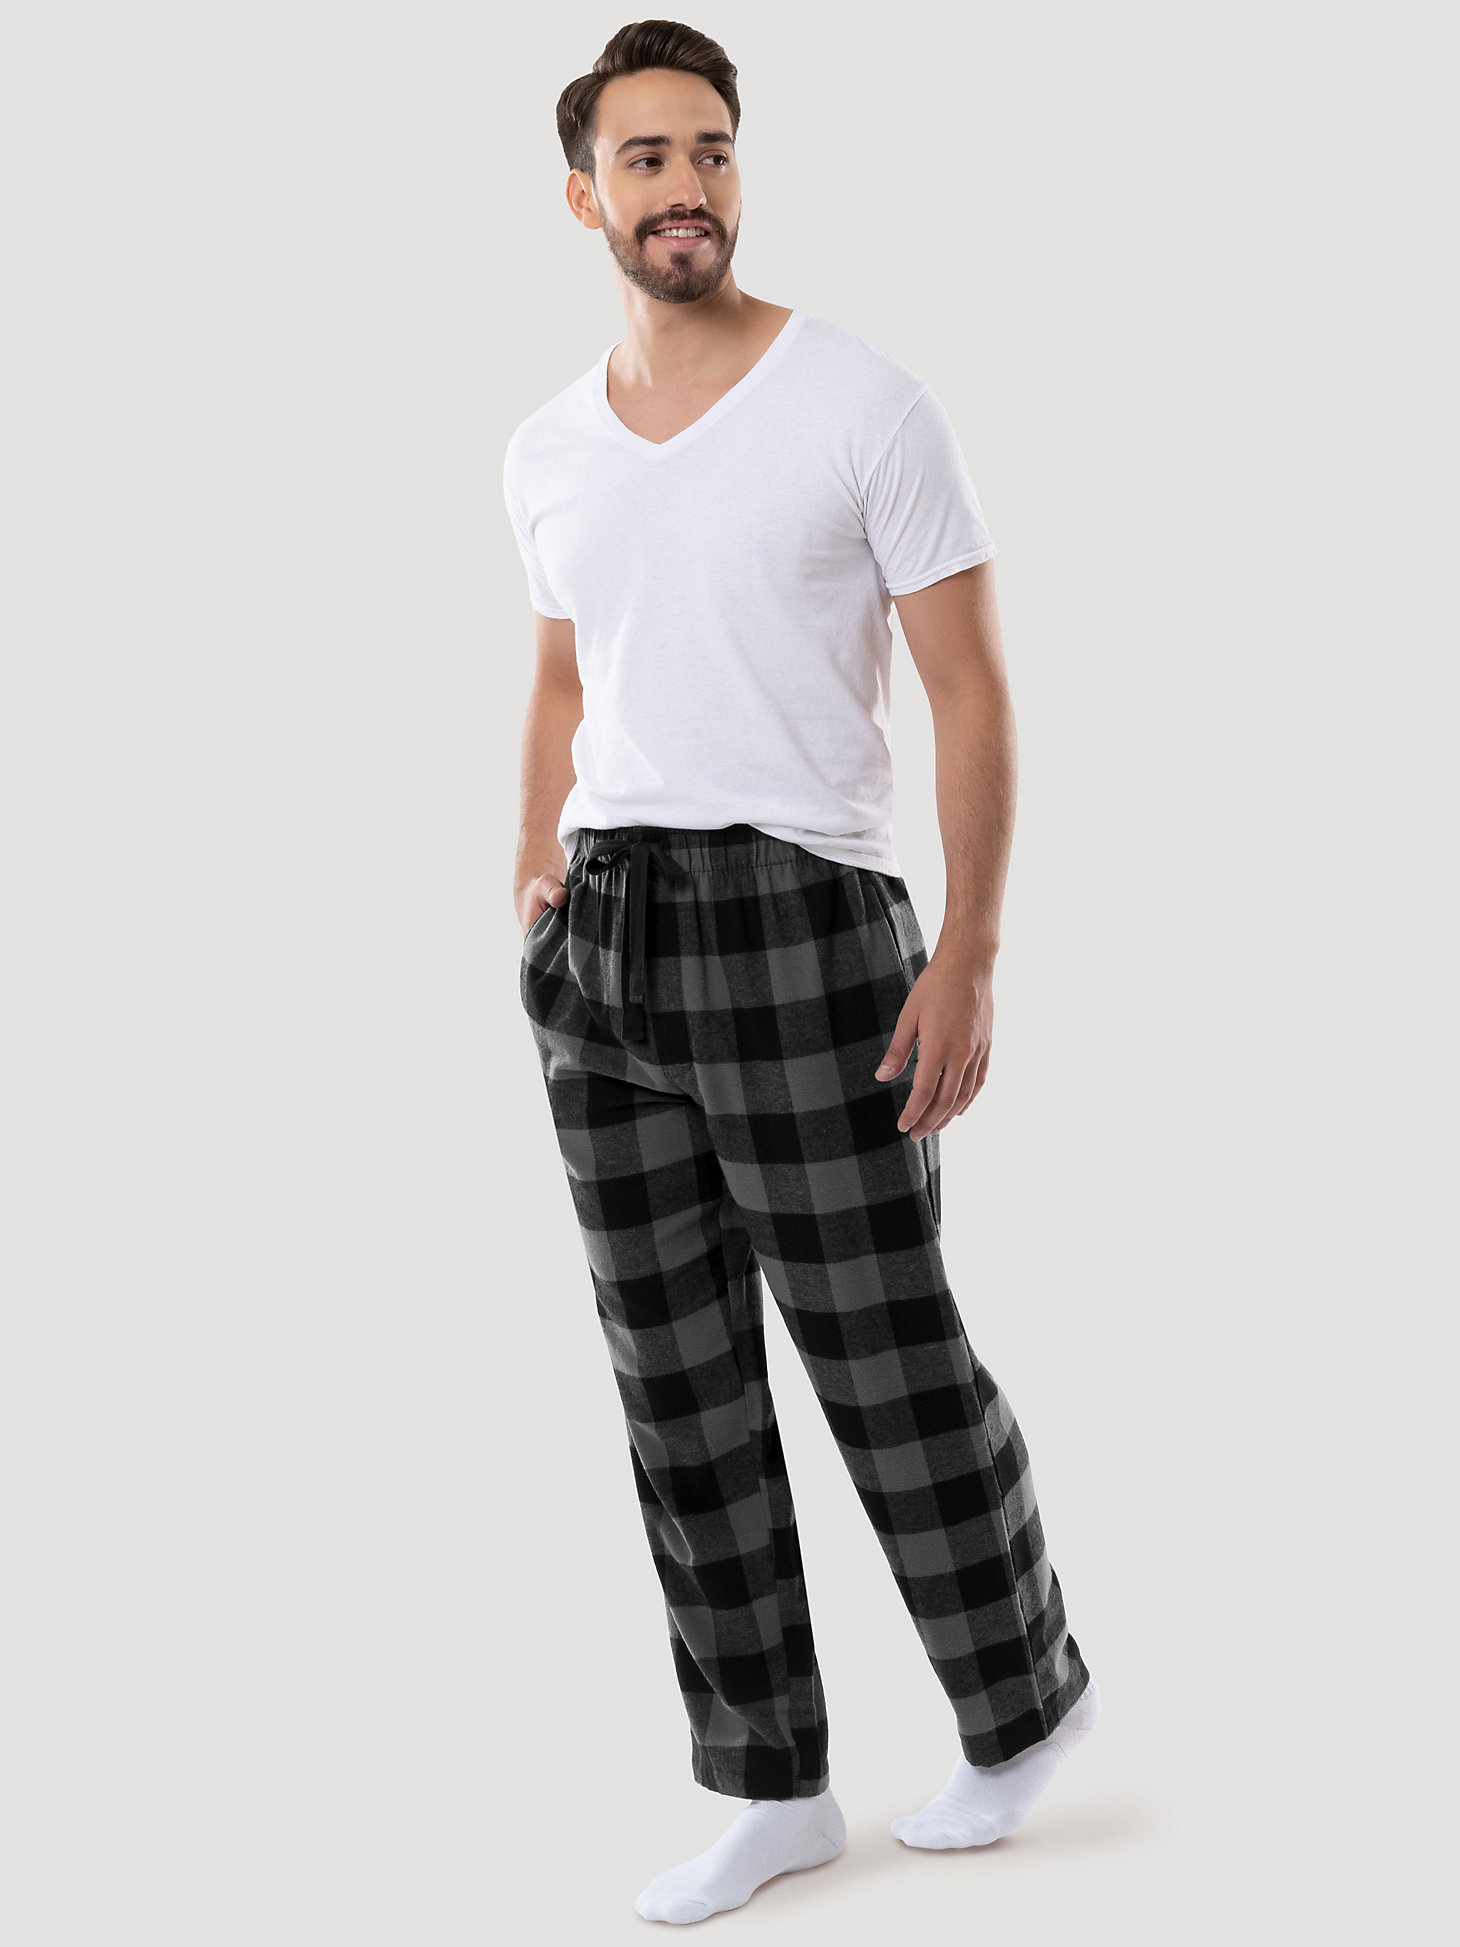 Men's Flannel Buffalo Plaid Pajama Pant in Charcoal main view